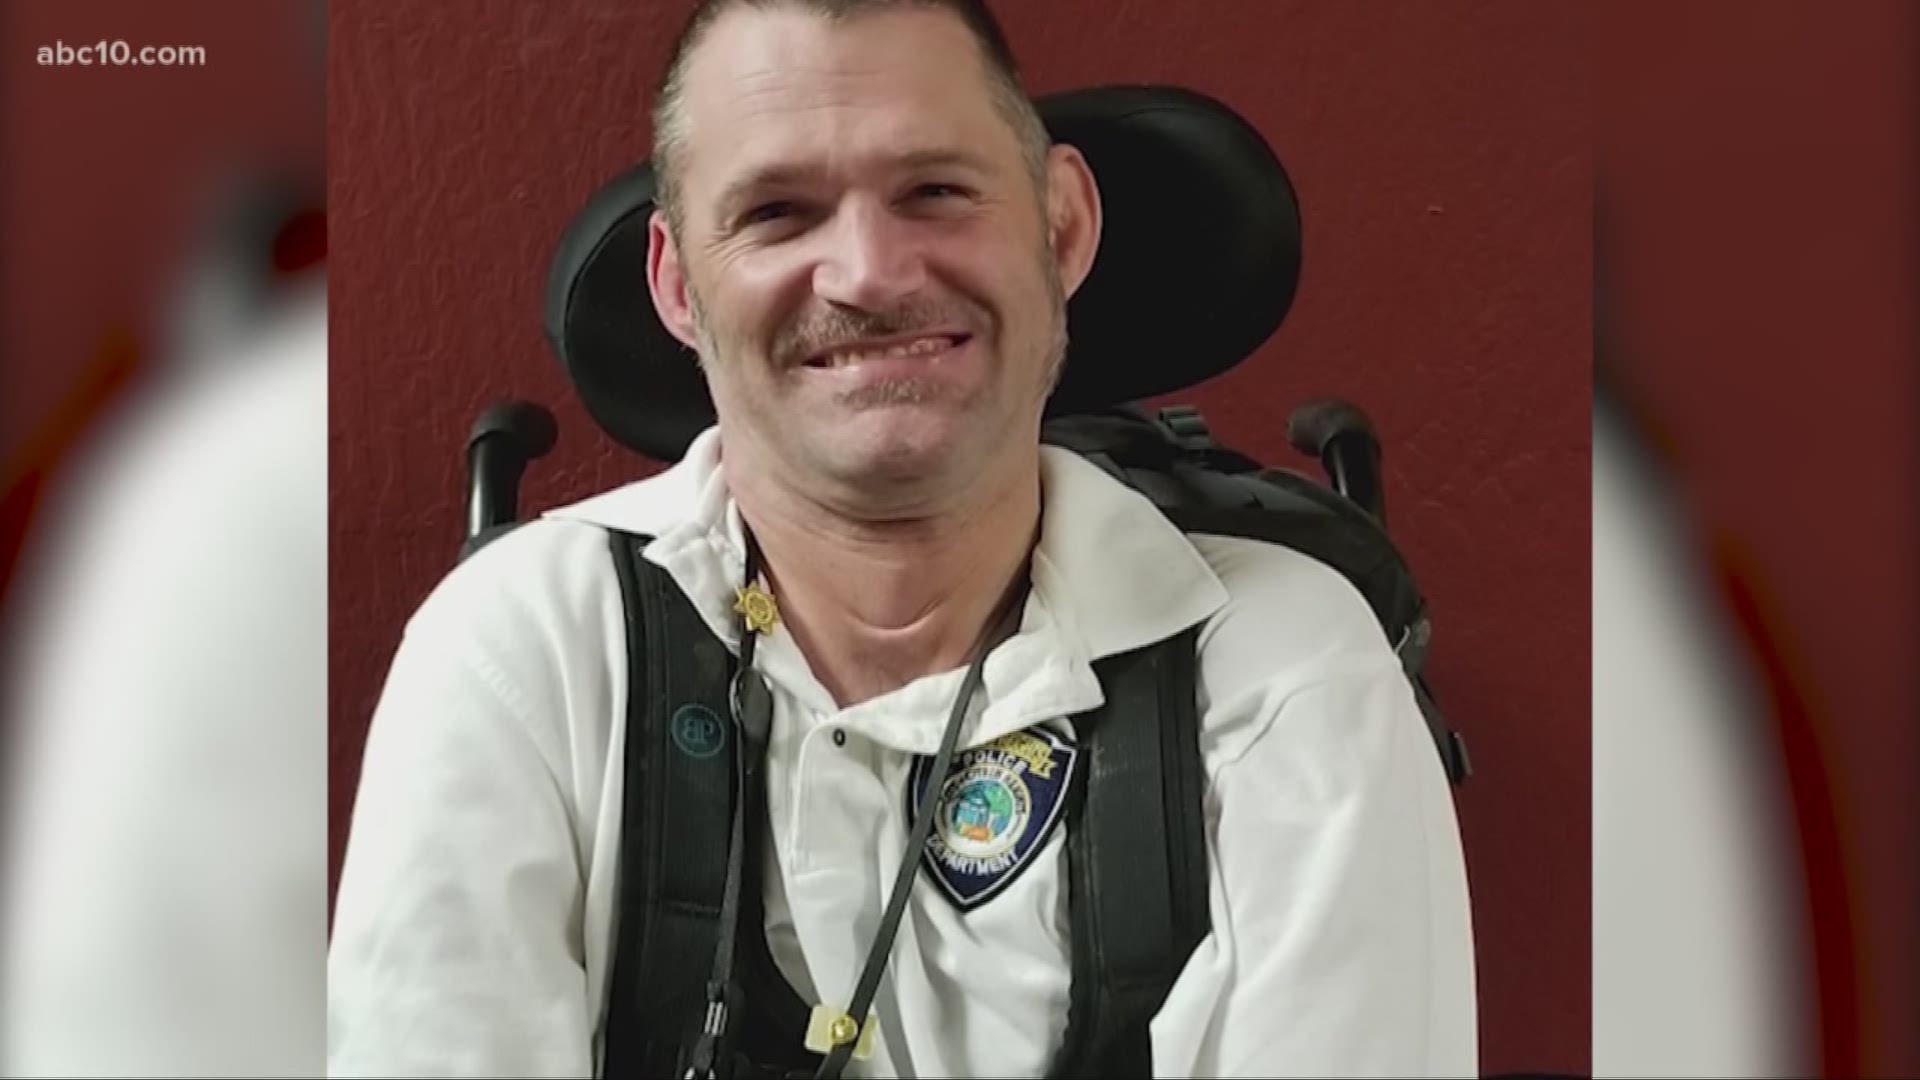 A Citrus Heights man has become the voice for those living with disabilities trying to find a place in the workforce.